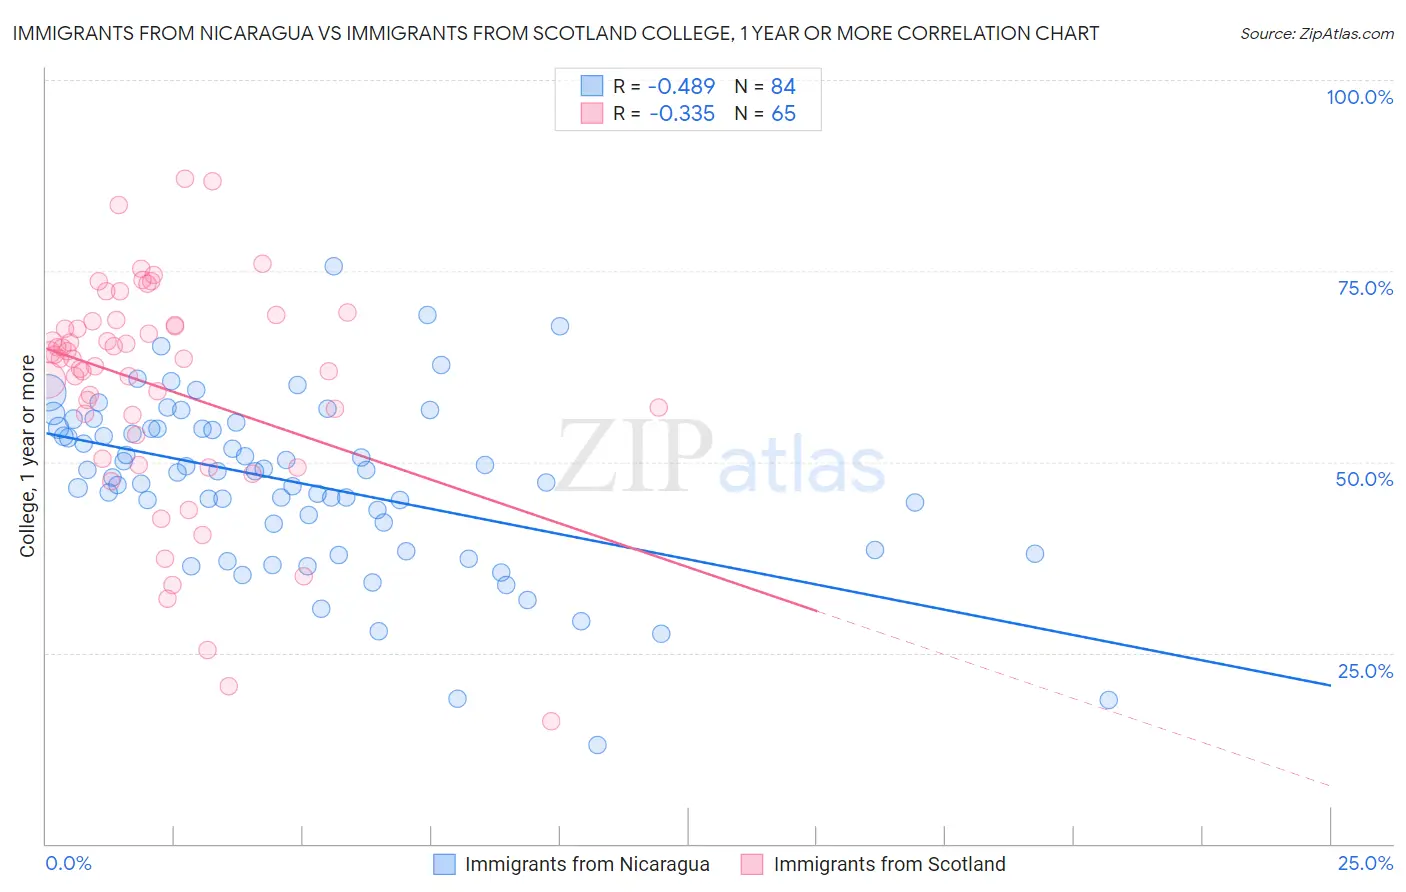 Immigrants from Nicaragua vs Immigrants from Scotland College, 1 year or more